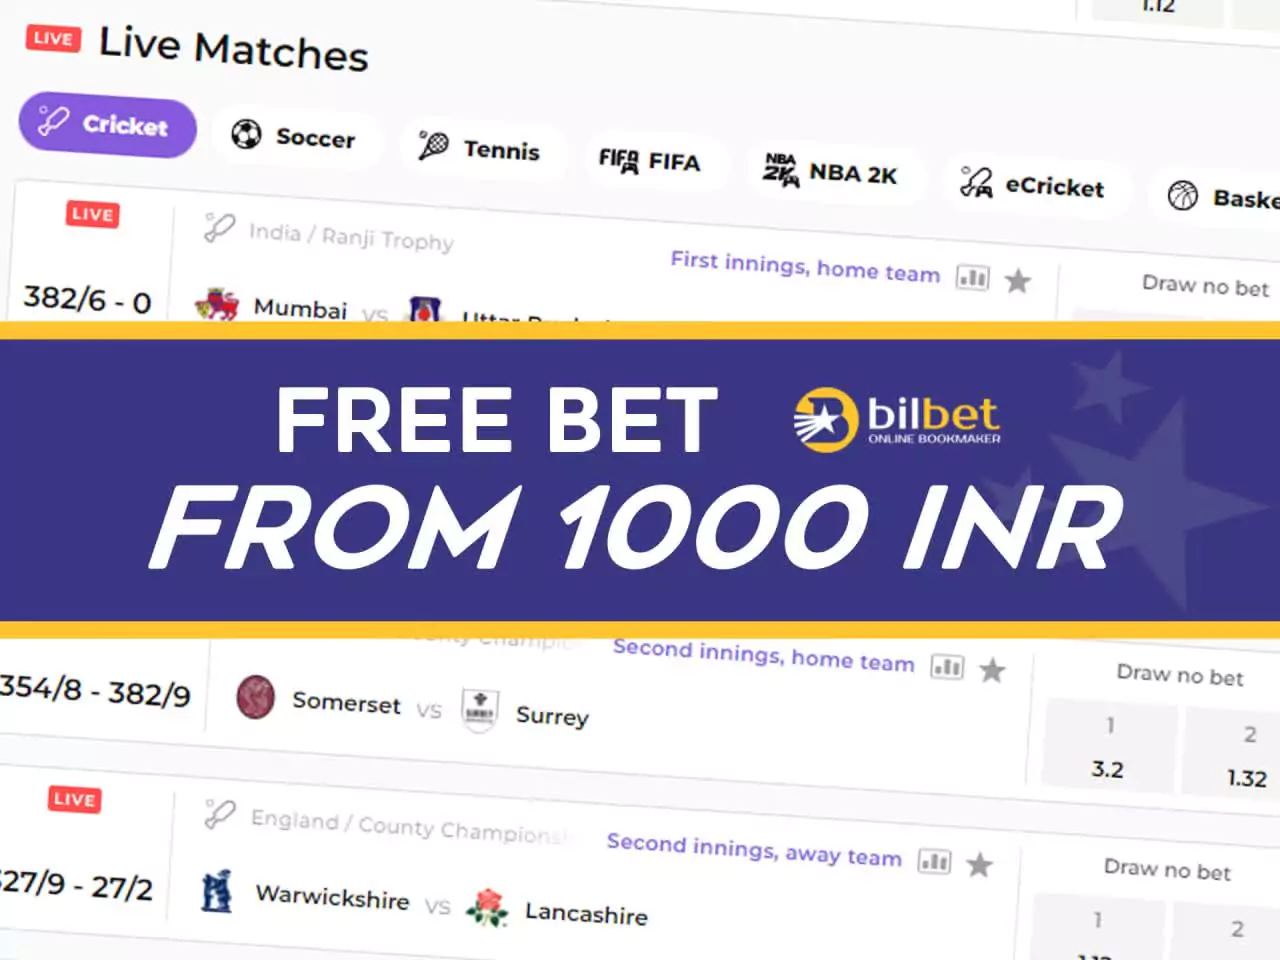 Get an additional free bet of 1000 INR.